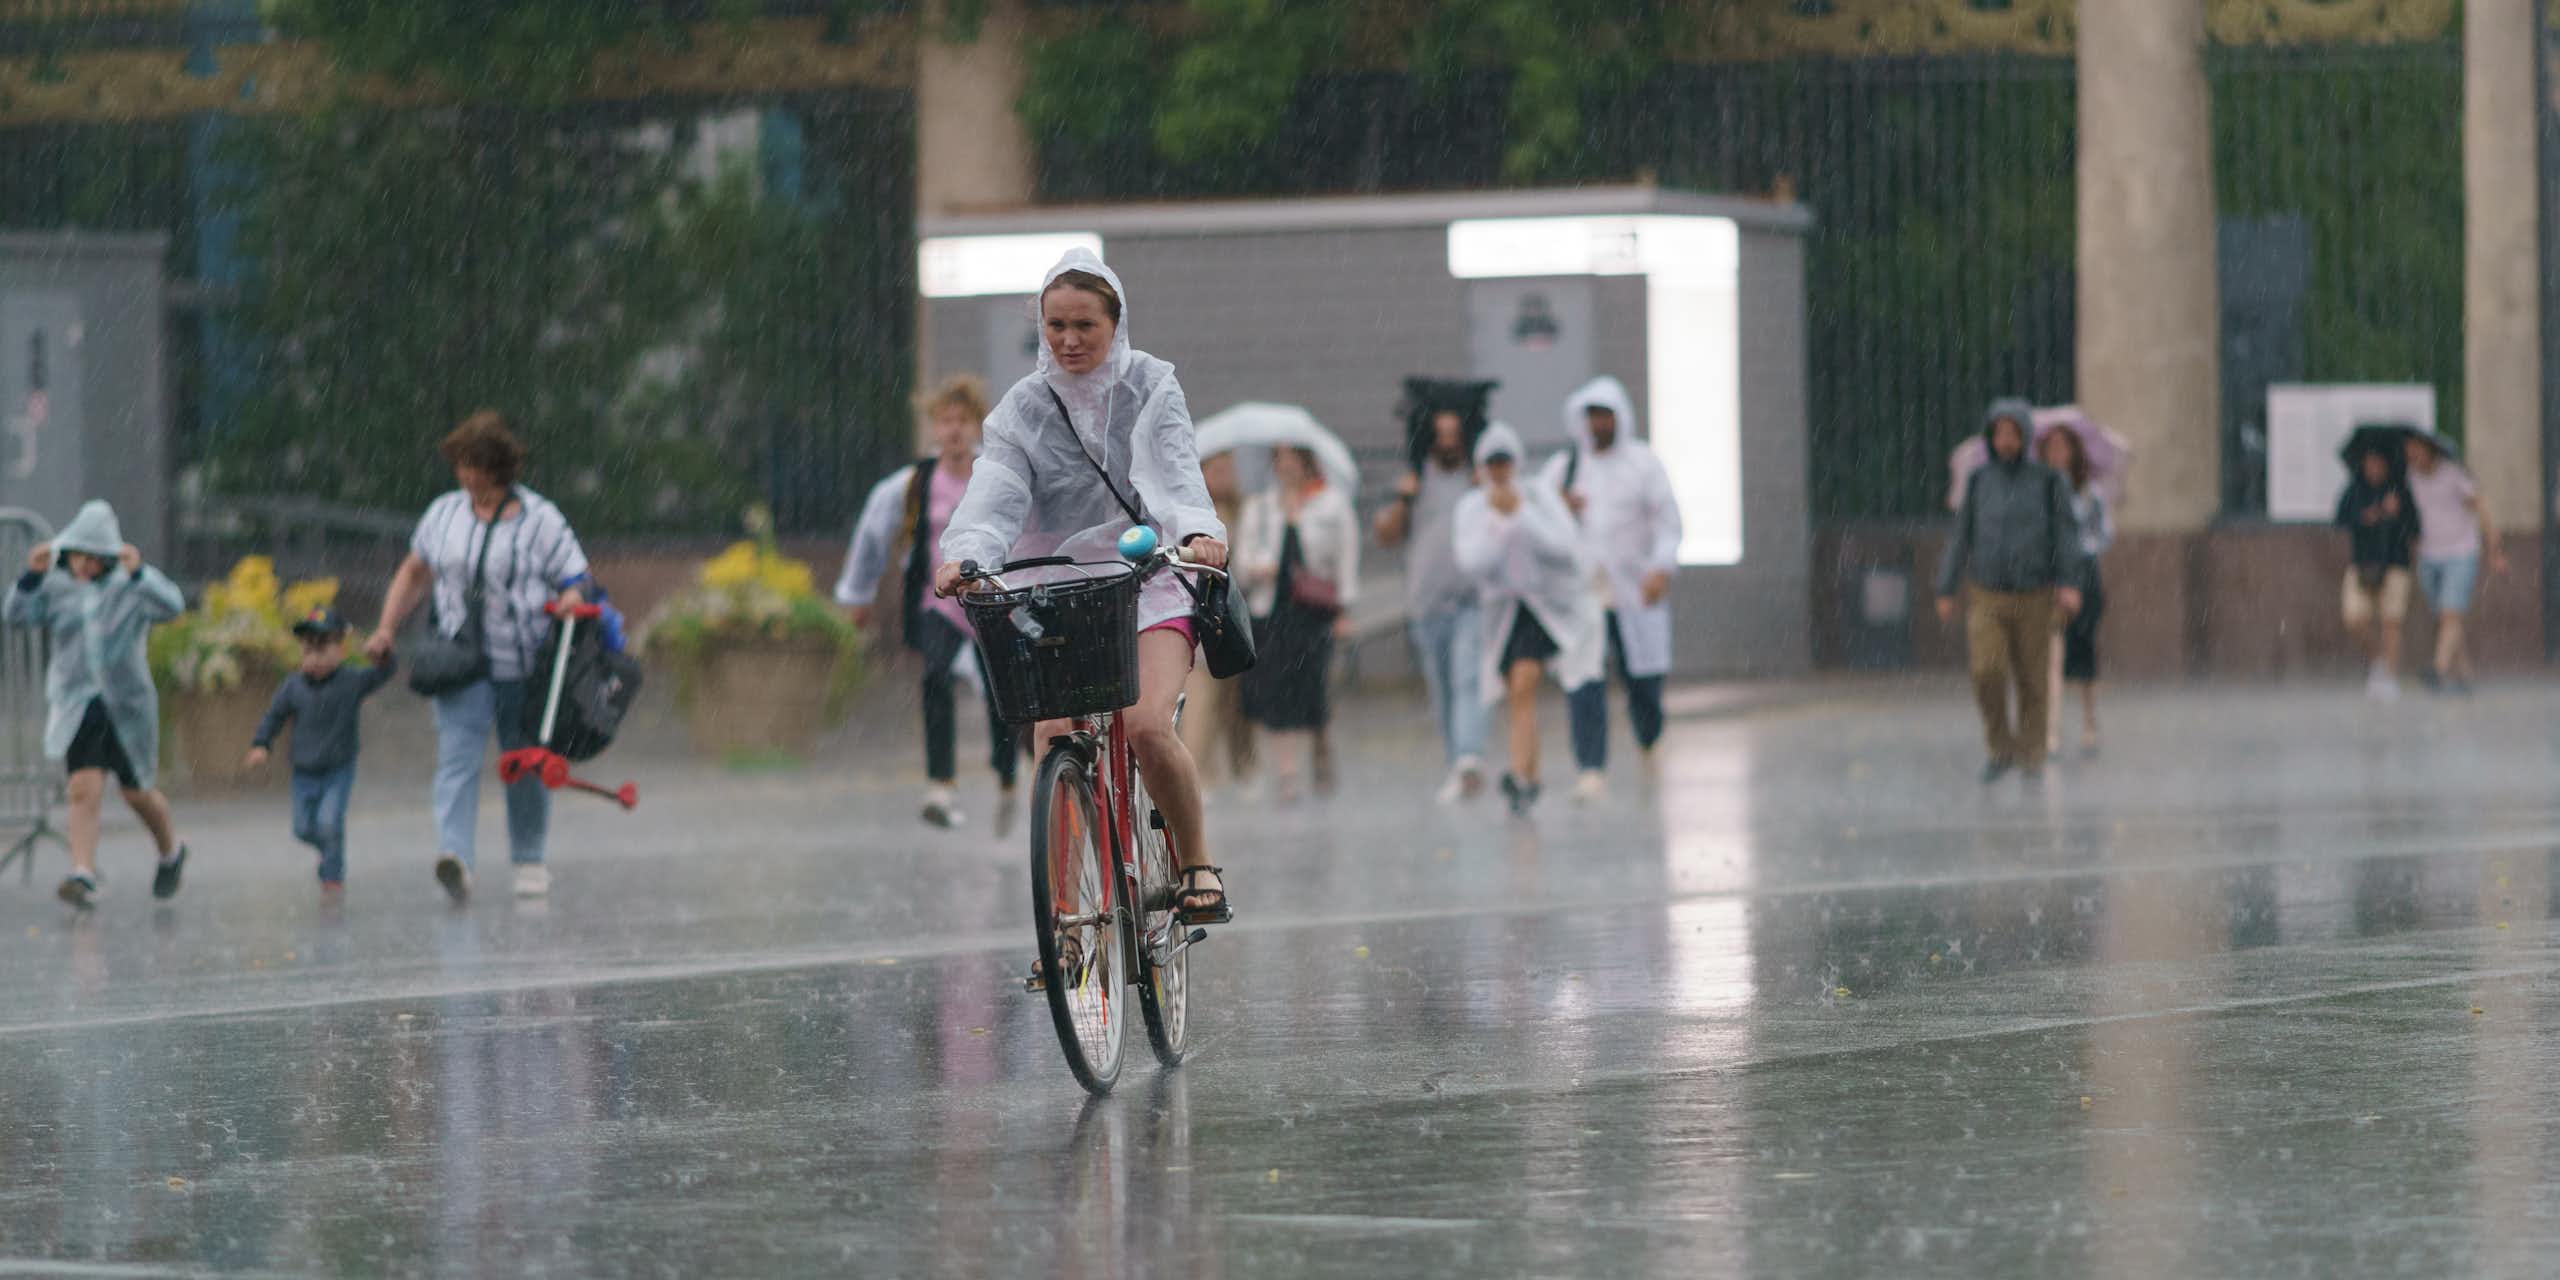 A woman cycles in the rain with people walking behind her